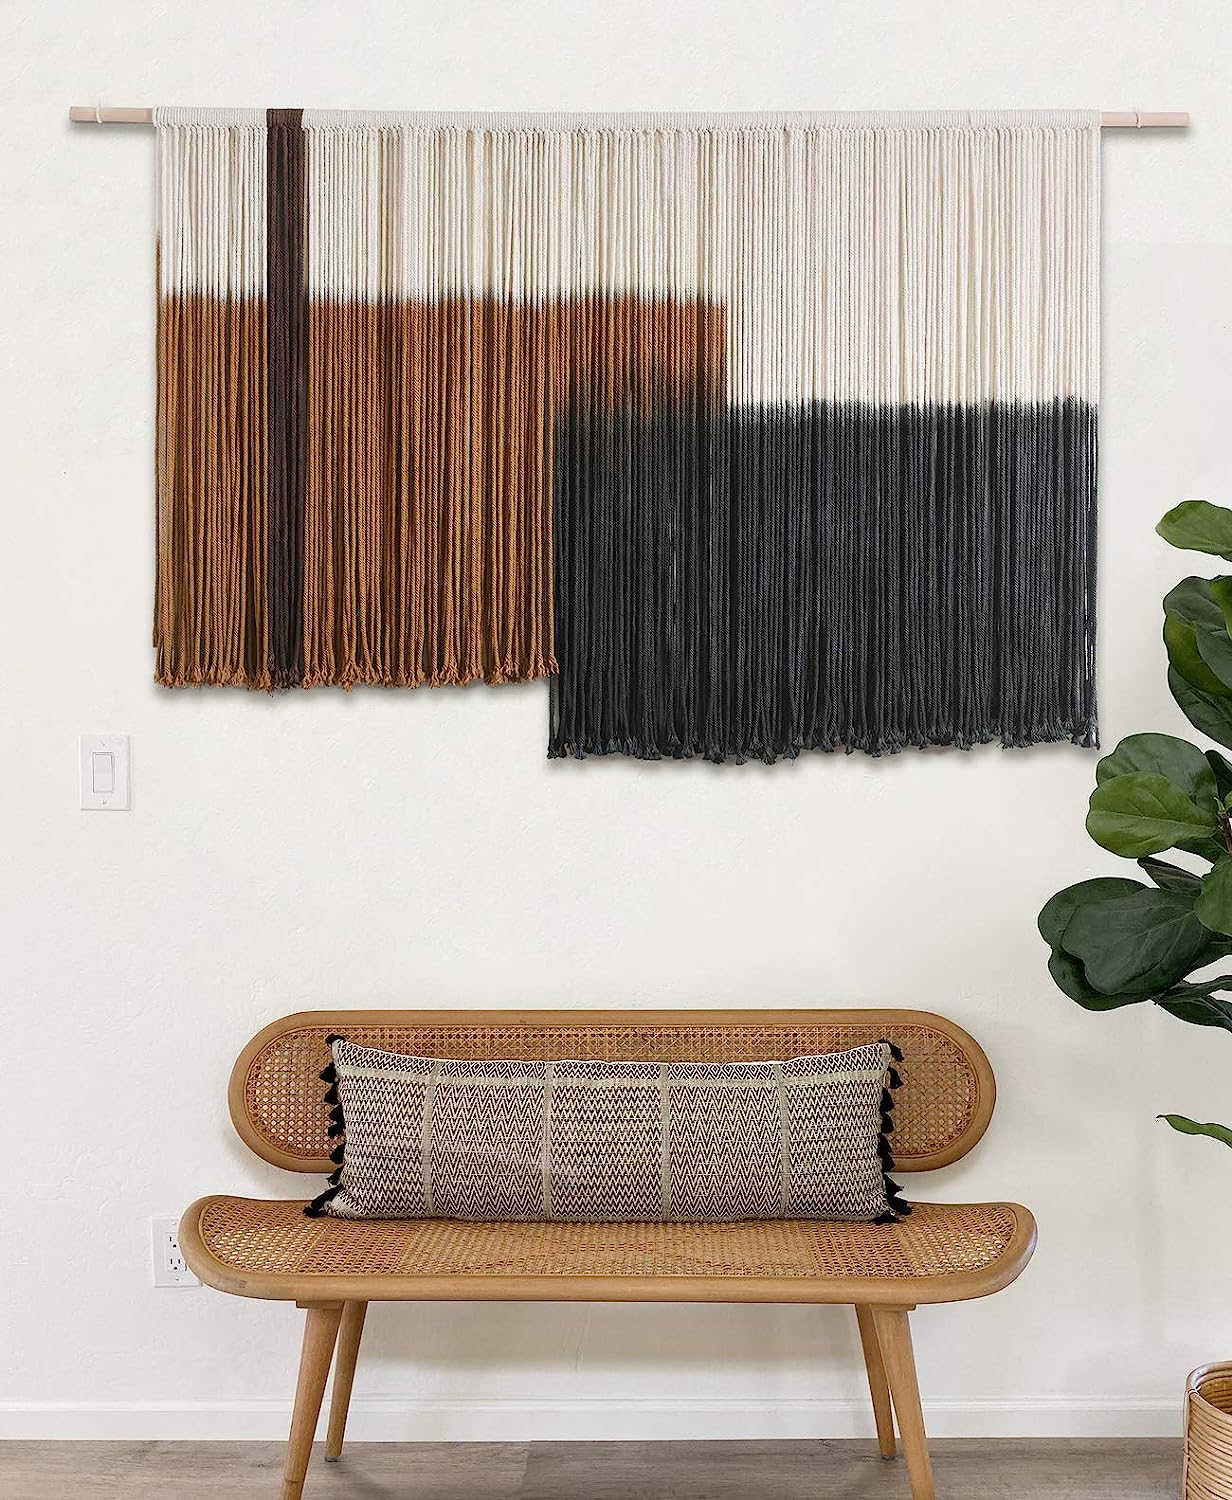 a picture showing one of most wished products of this fall -- it's a macrame wall art